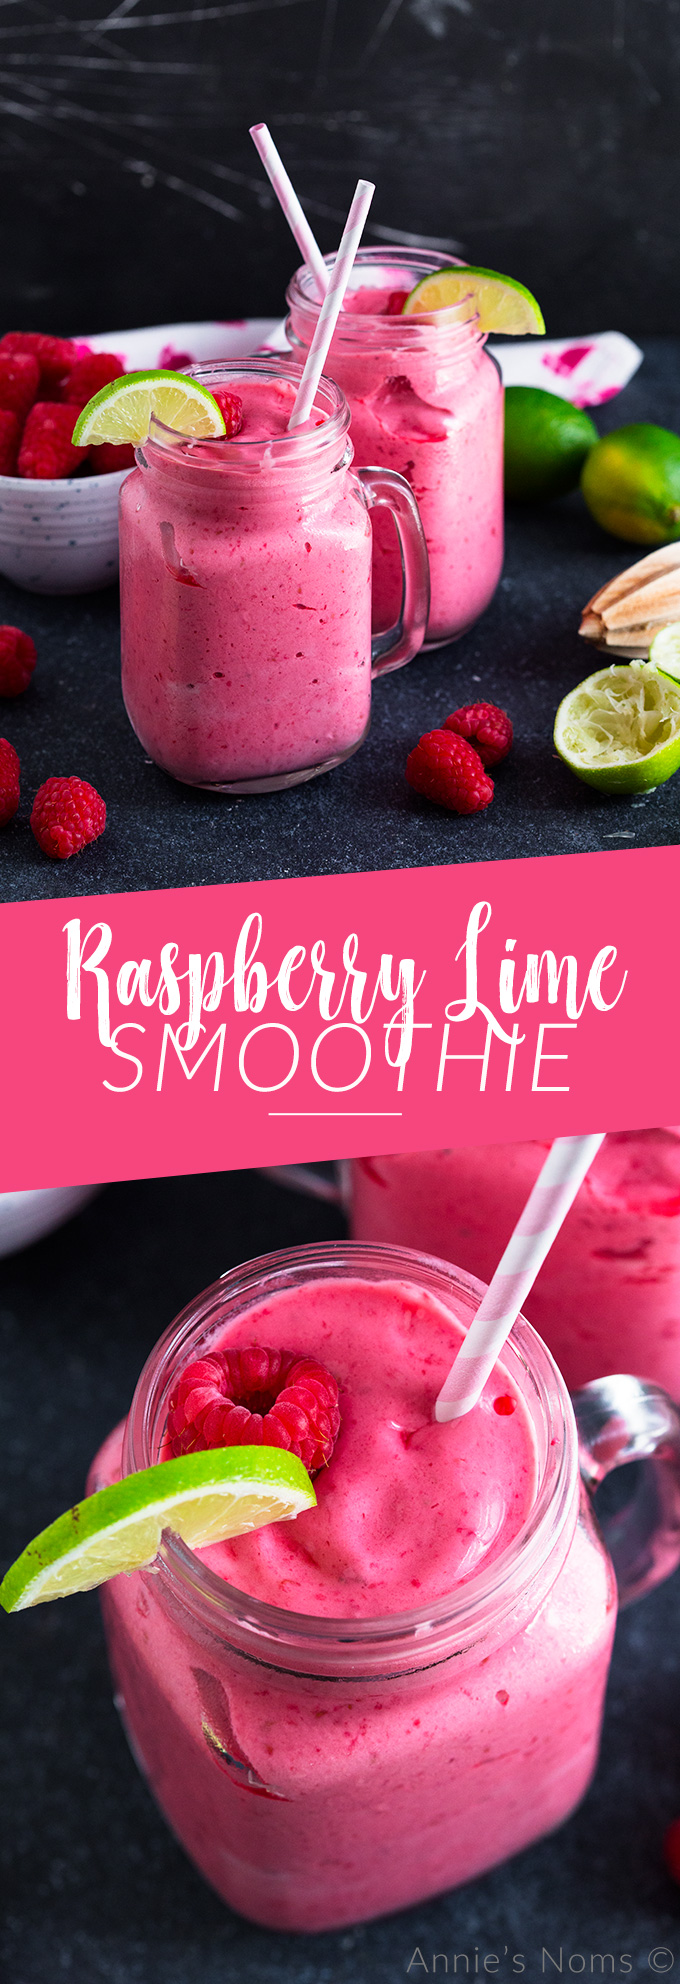 Raspberry Lime Smoothie - Annie's Noms